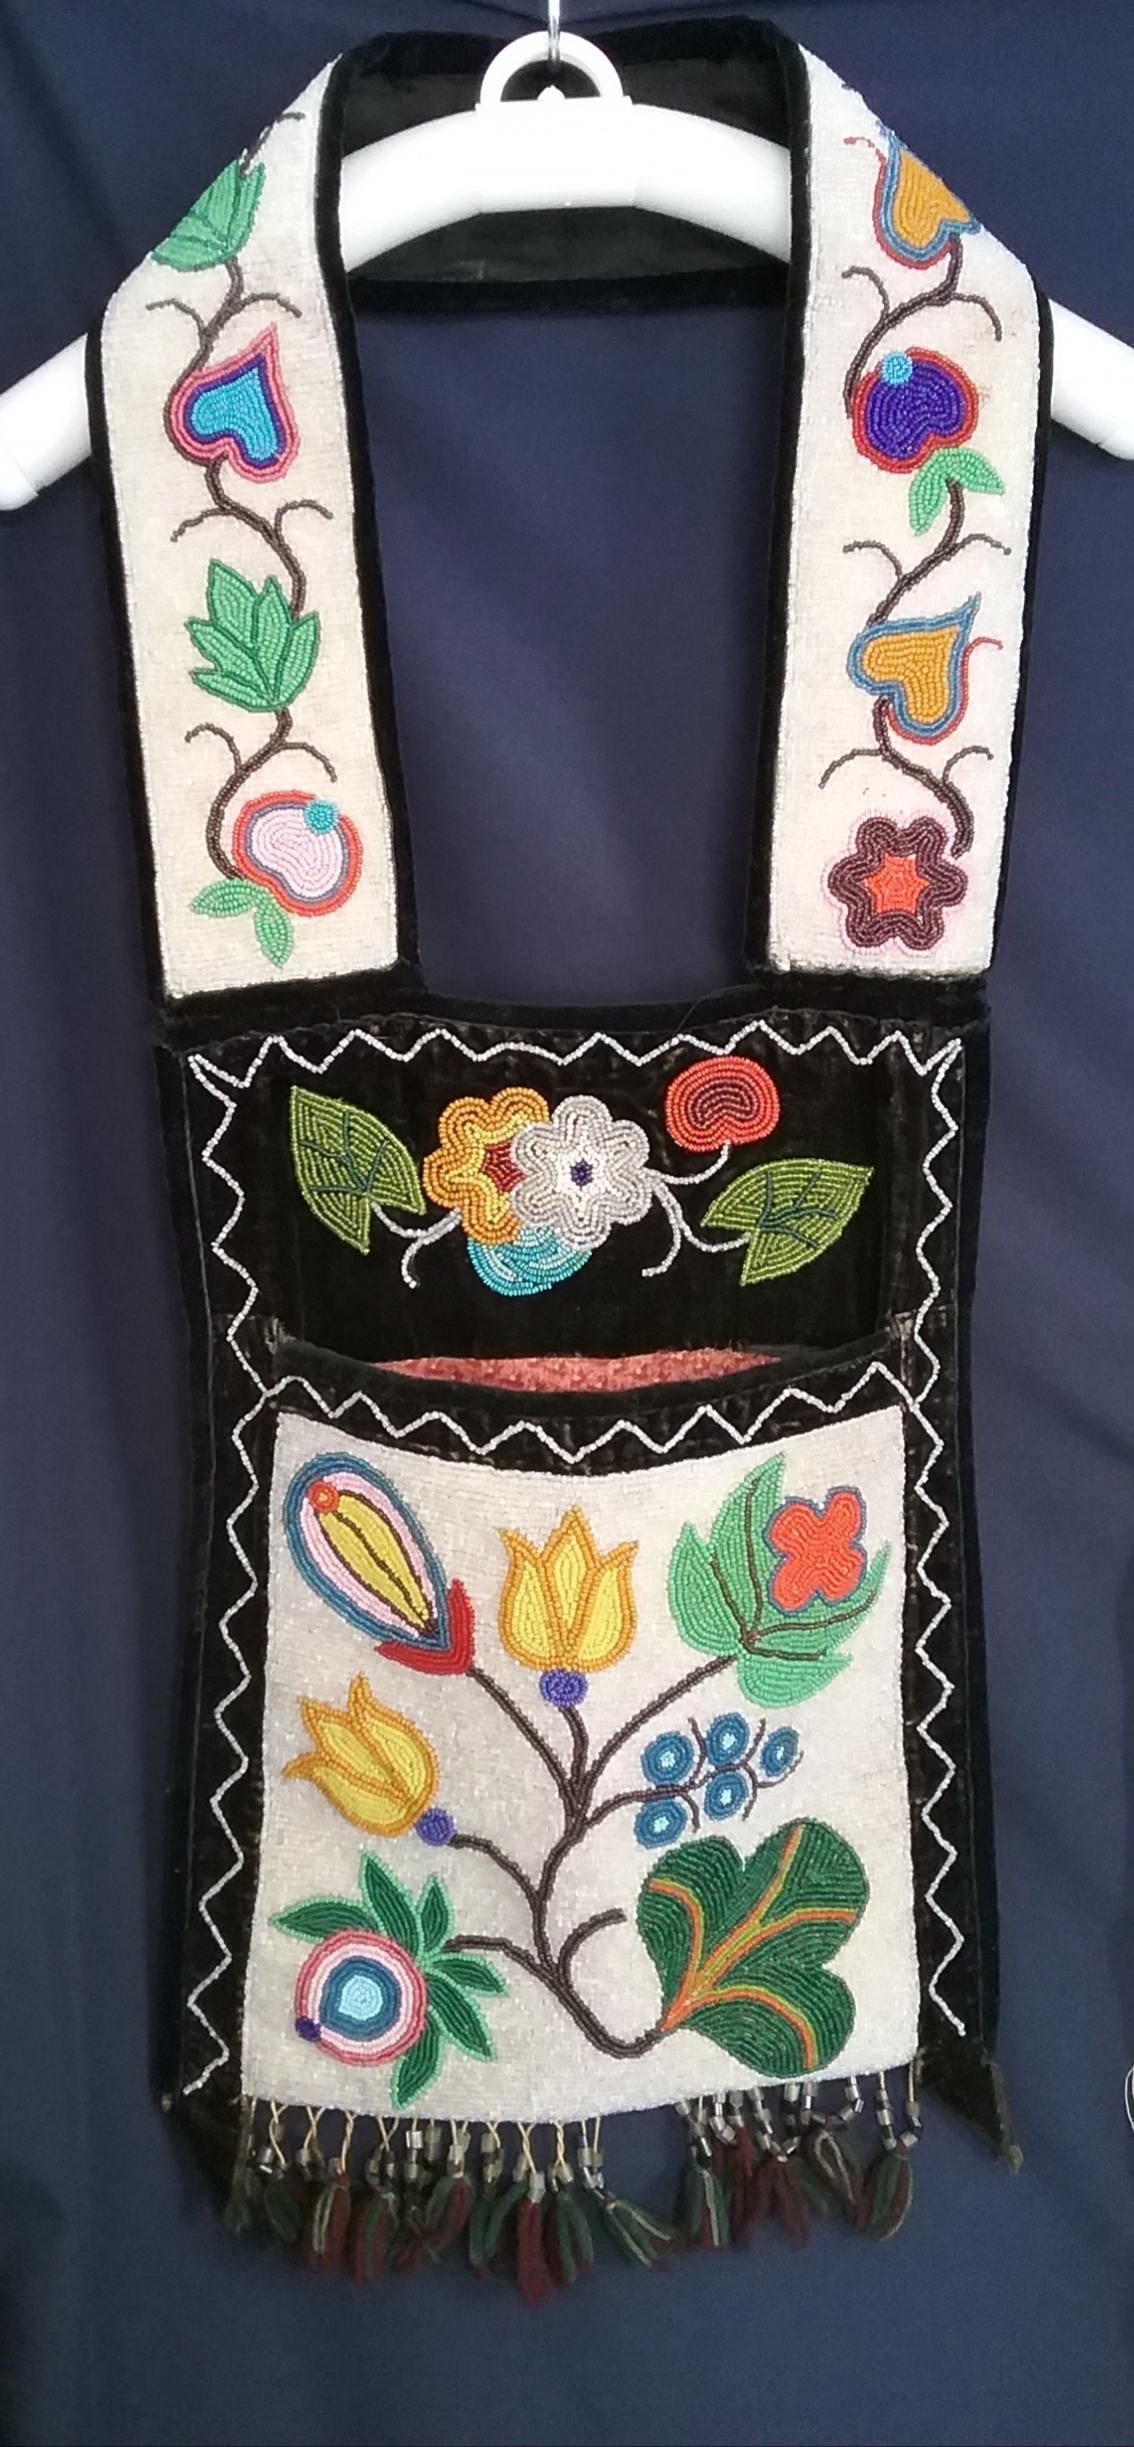 Small Ojibwe Gashkibidaagan: This Ojibwe gashkibidaagan (bandolier bag) was purchased by Upsala resident Jean ­Martinson at a garage sale in Mispah, ­Minnesota. She paid a quarter for it. The bag was originally taken as payment for a grocery store bill in the Turtle Mountains of North Dakota. Jean owned the bag for 20 years before ­donating it to the museum in 1996. The beadwork is spot-stitch applique. Note the floral motif and that the pattern from one side of the strap to the other is not identical. Based on the design, this bag was likely ­produced by someone in the White Earth Band. MCHS collections, #1996.36.3.